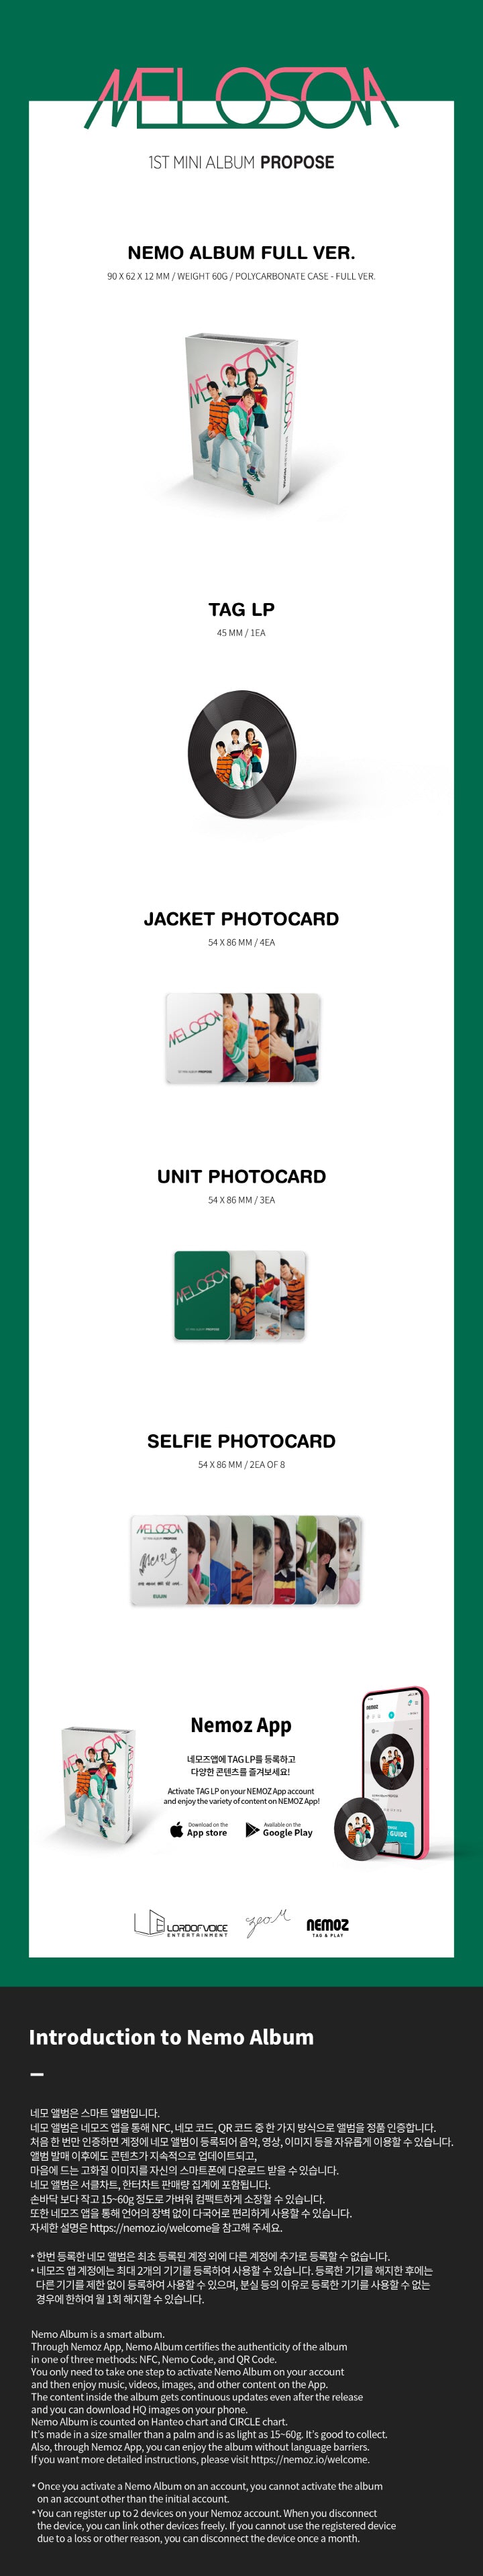 1 TAG LP
4 Jacket Photo Cards
3 Unit Photo Cards
2 Selfie Photo Cards (random out of 8 types)